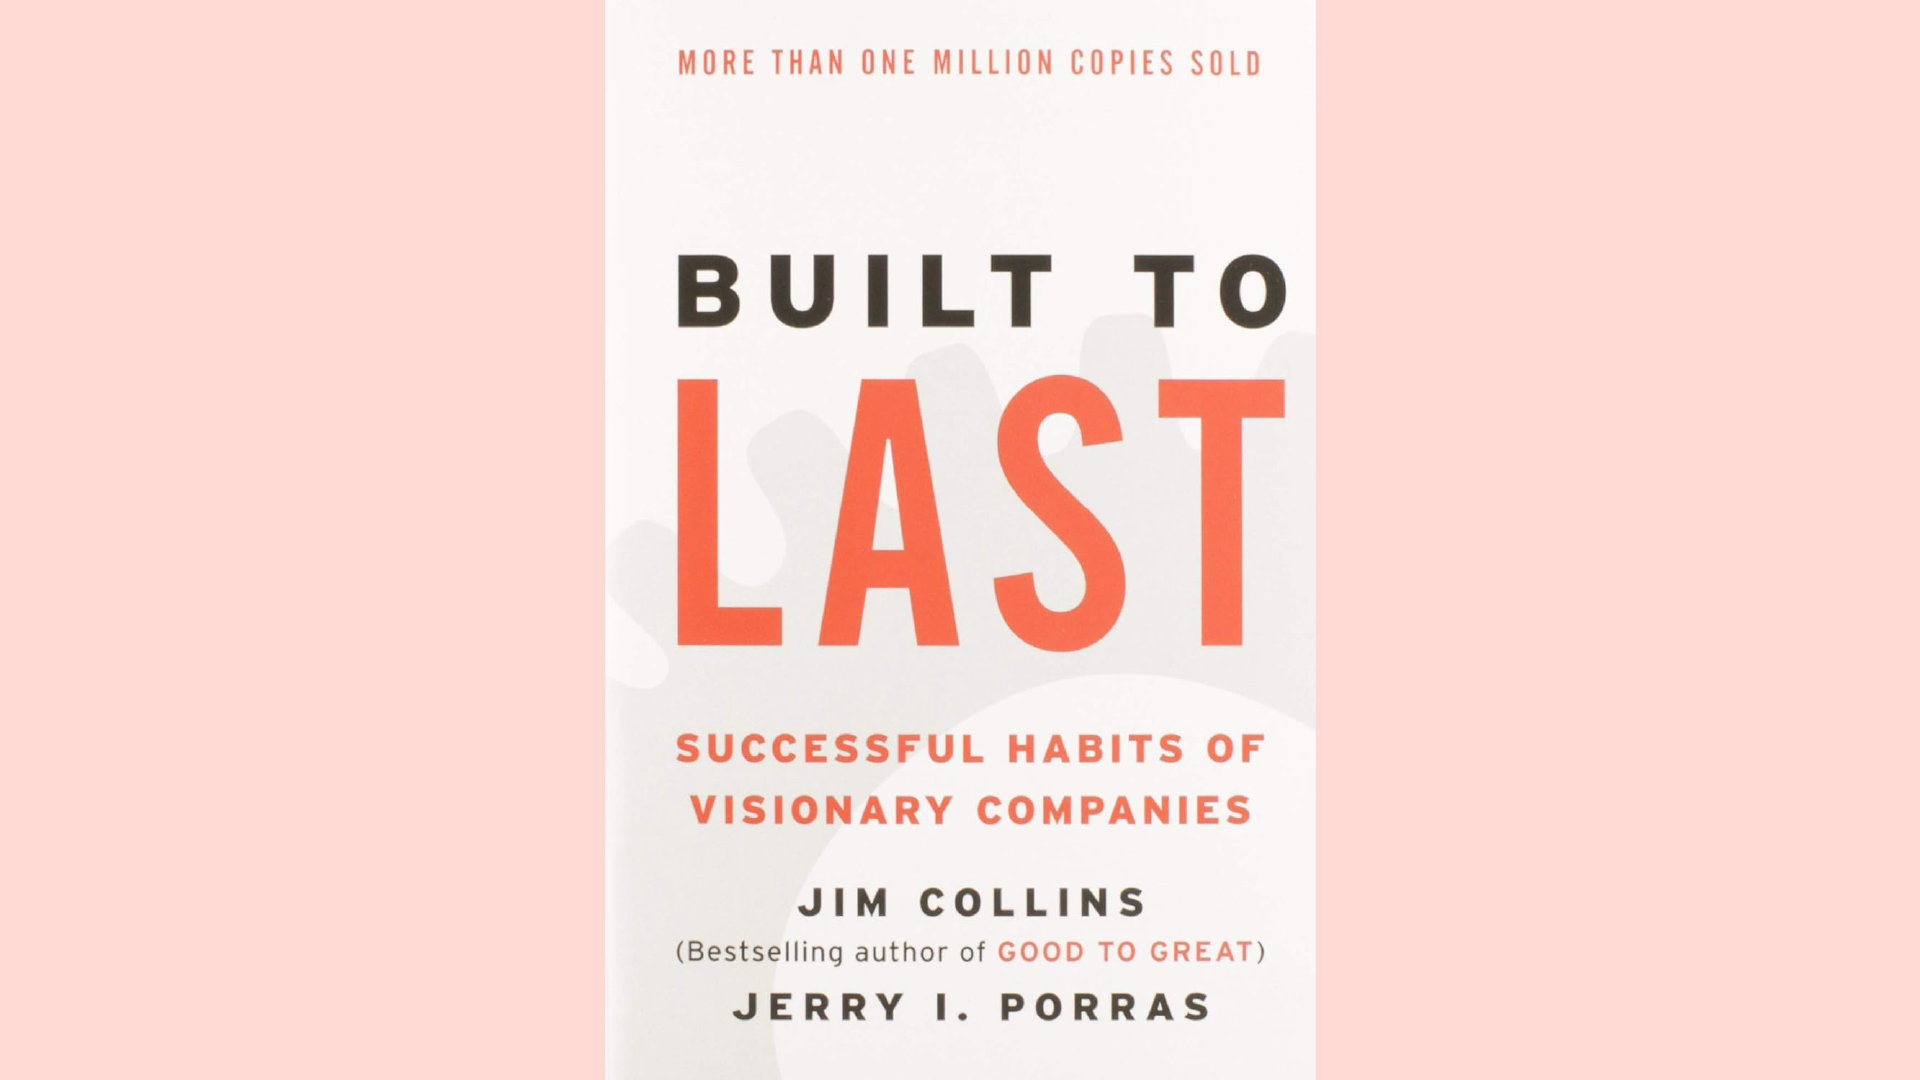 Summary: Built to Last by Jim Collins and Jerry I. Porras